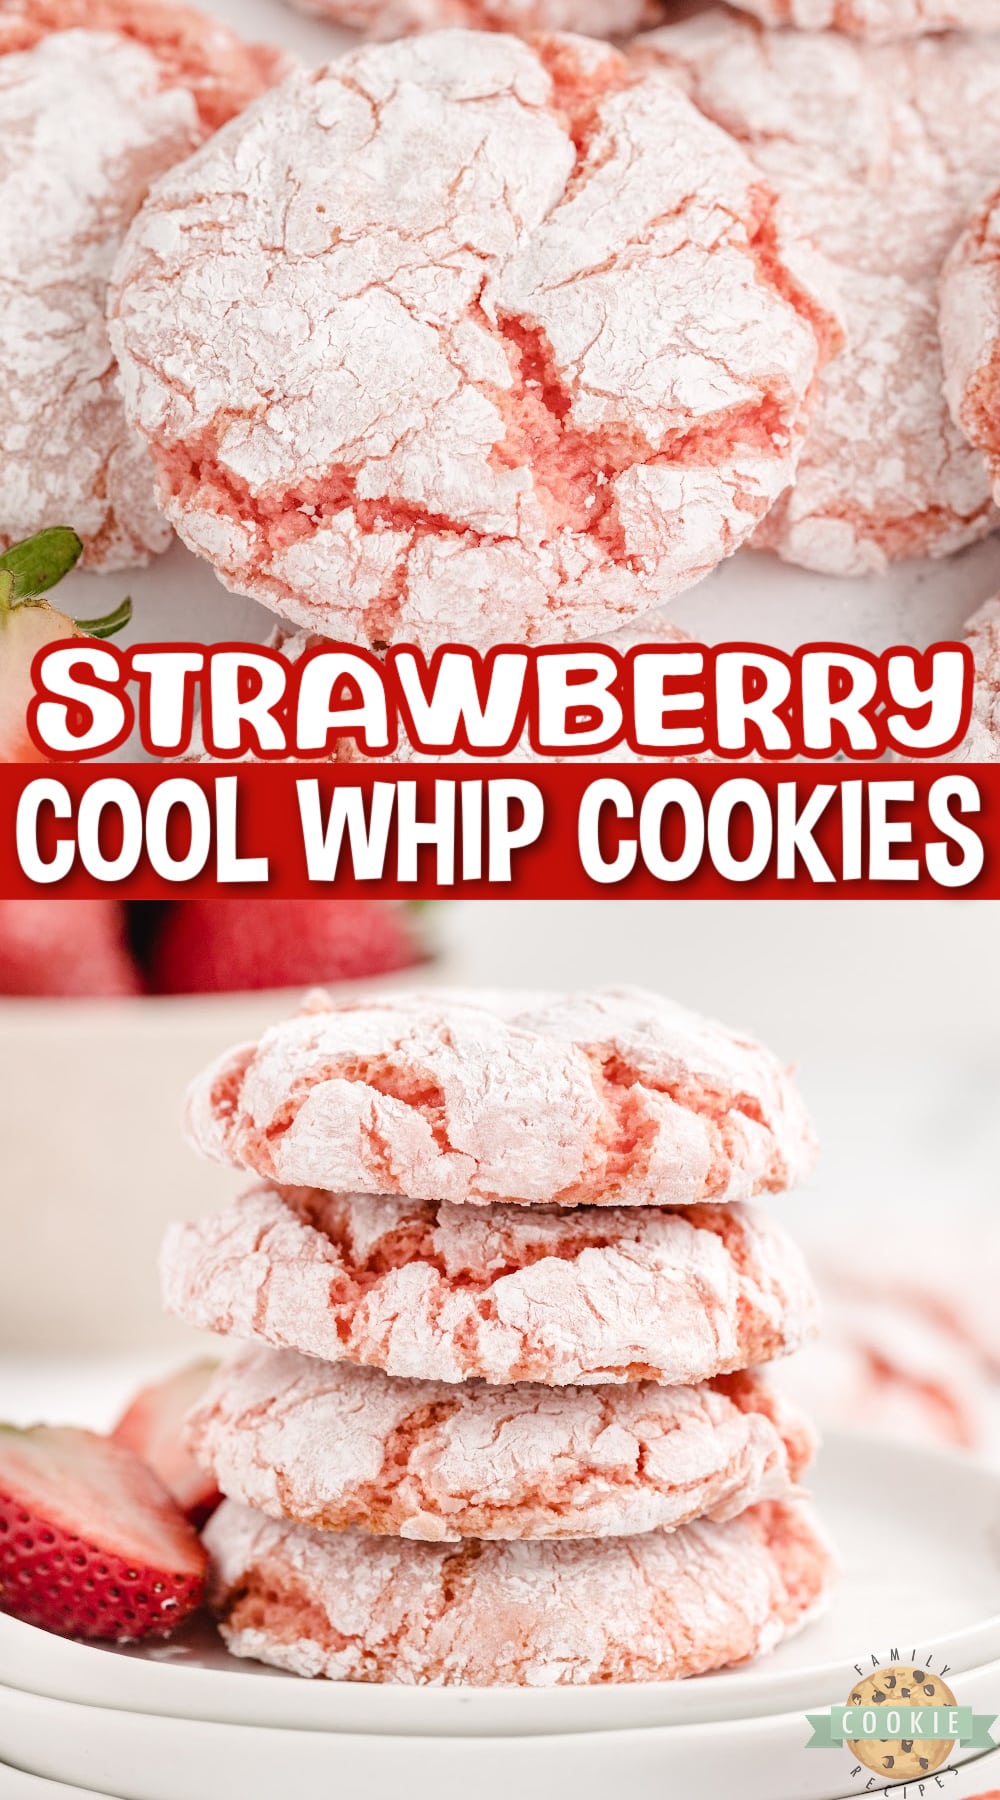 Strawberry Cool Whip Cookies made with a strawberry cake mix, Cool Whip and an egg. A lighter cookie recipe that is easy to make and with less calories than traditional cake mix cookies